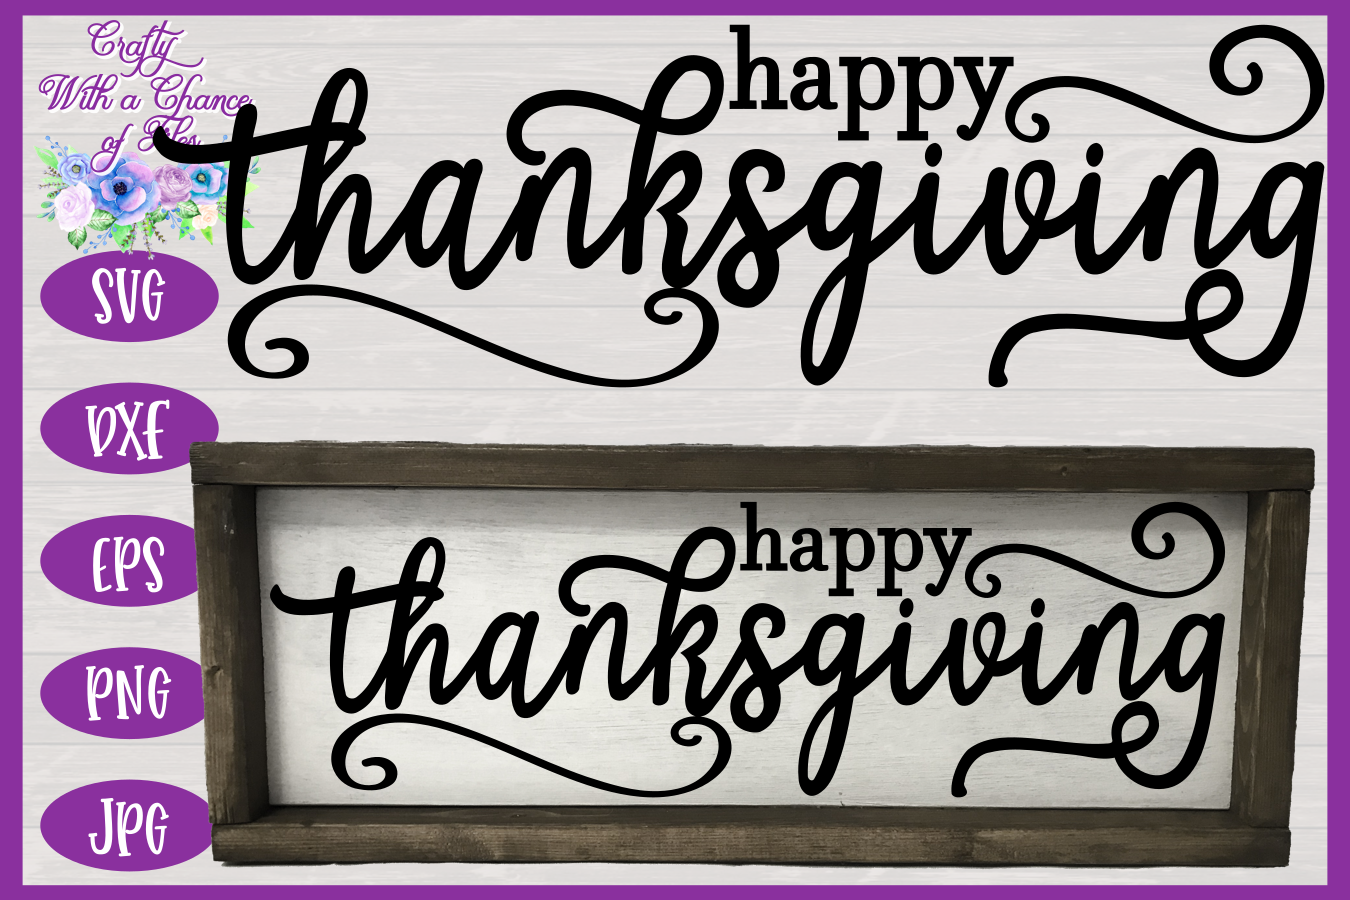 Happy Thanksgiving Svg Fall Svg Autumn Svg Farmhouse Sign Svg By Crafty With A Chance Of Files Thehungryjpeg Com